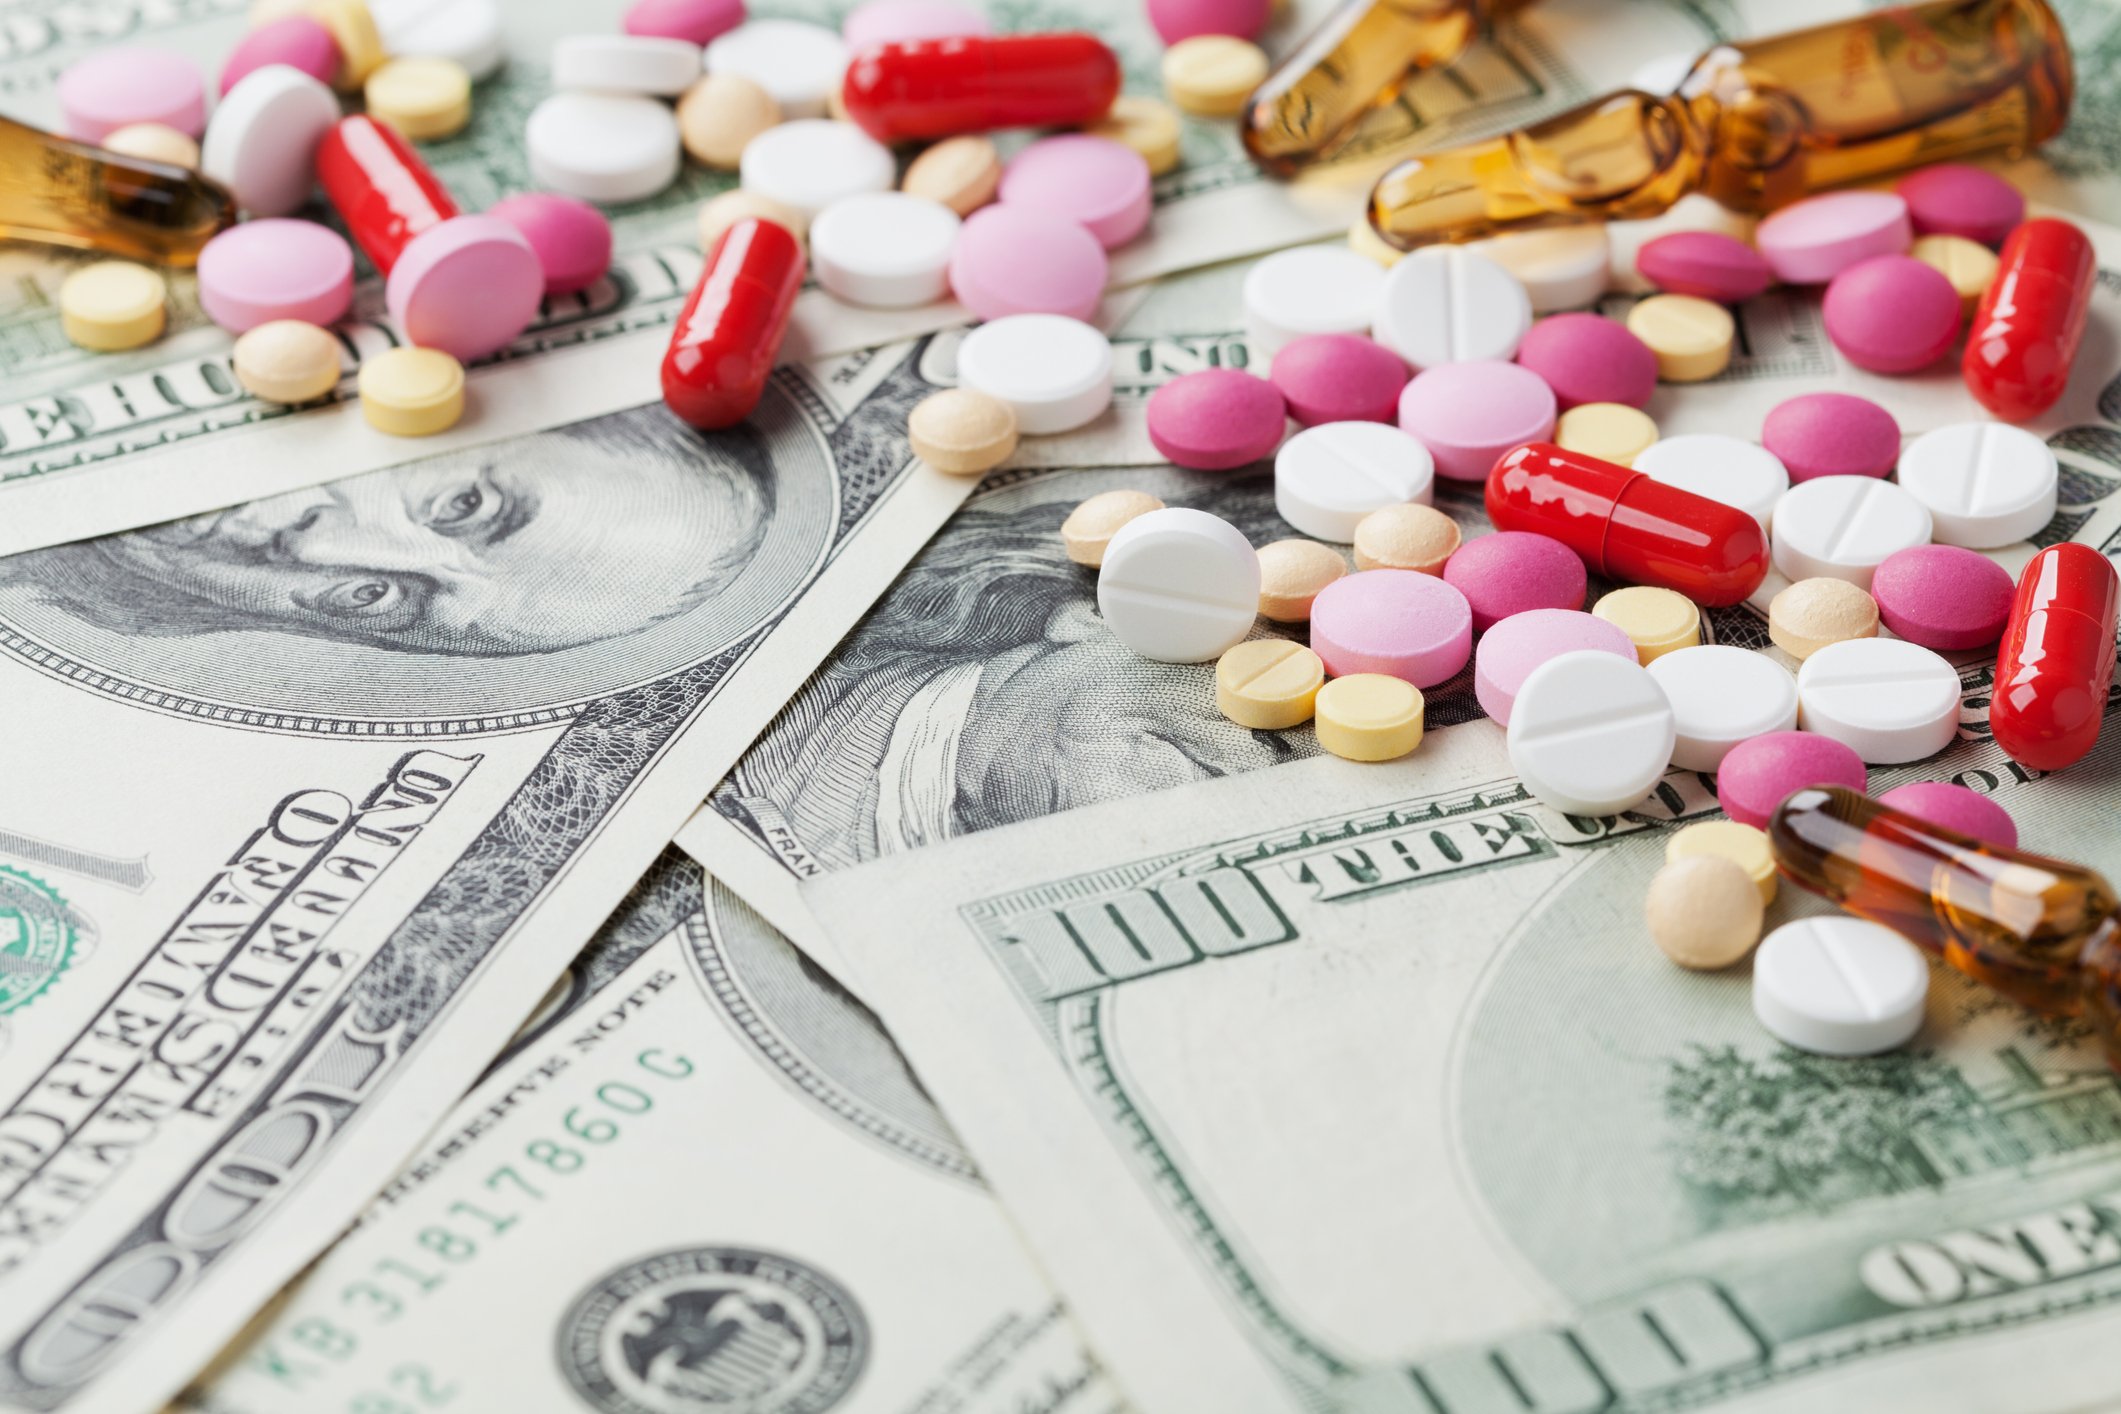 Industry Voices—The growing role of pharmacists in driving down drug costs through transparency